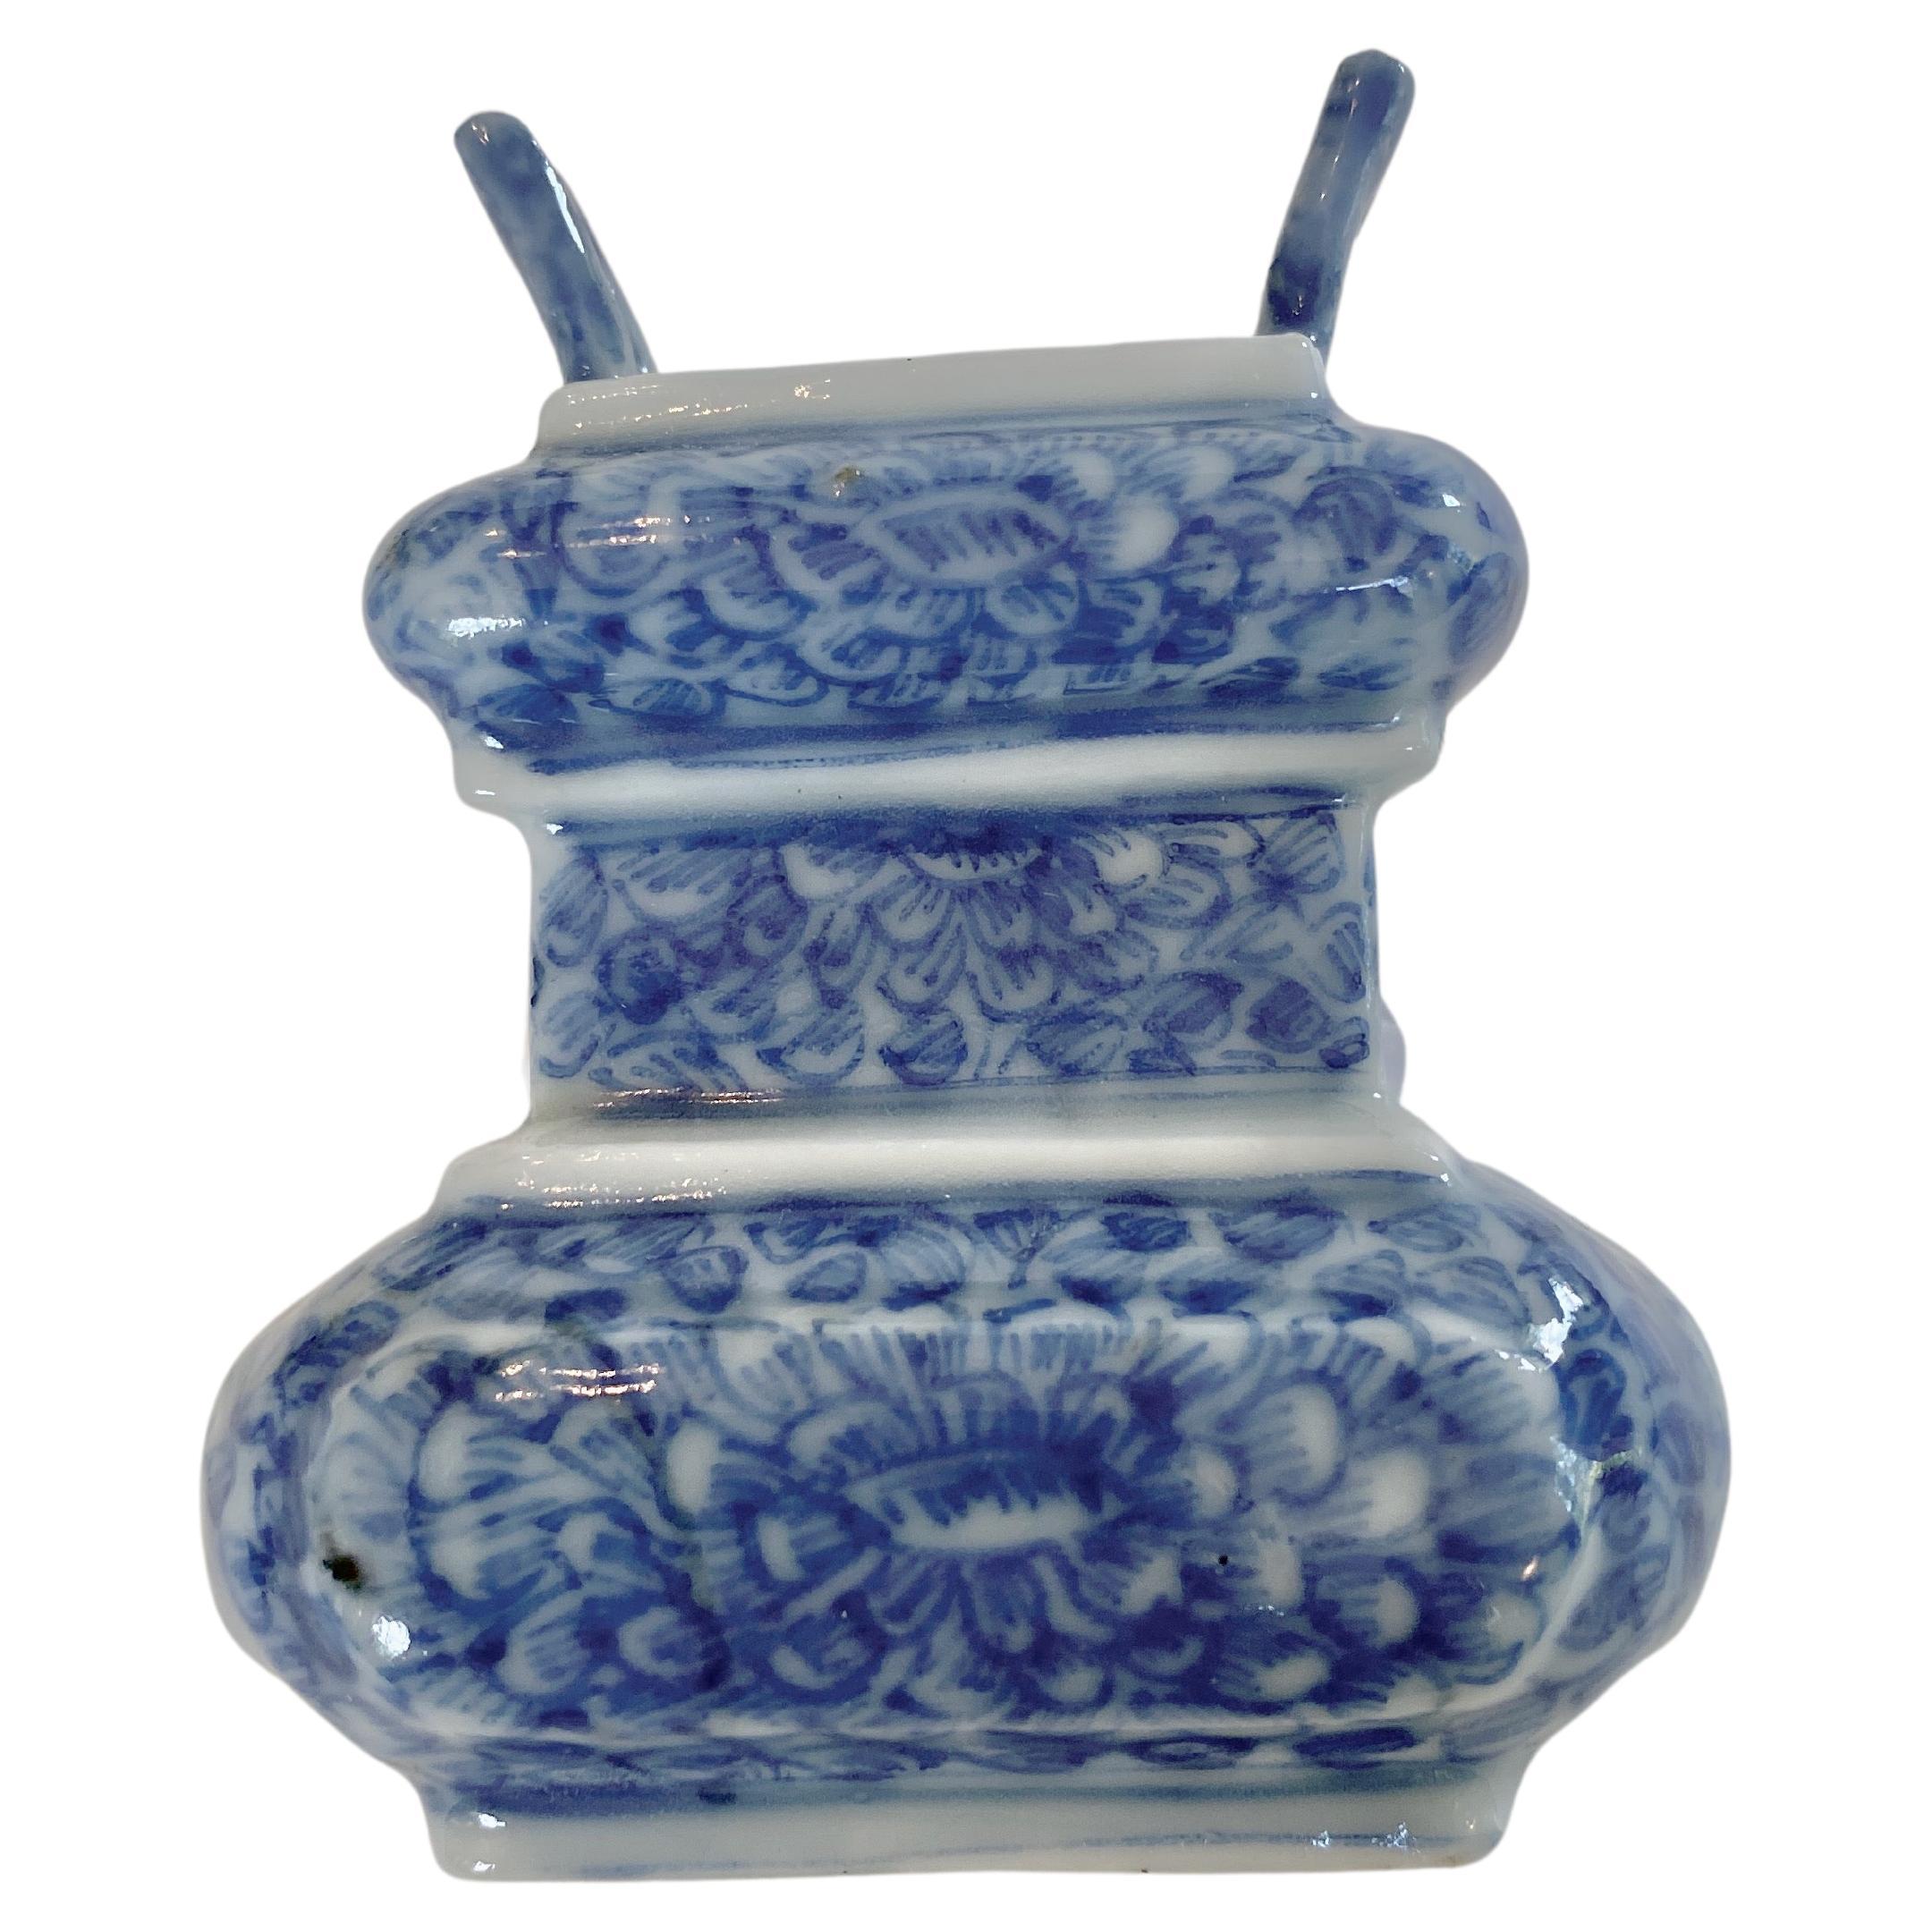 Miniature Chinese porcelain vessel in the form of an incense burner with handles, Qianlong period (1735-1796). It is decorated with one large flower, whose vivid blue petals cover the surface. There is restoration on one of the handles. The piece is